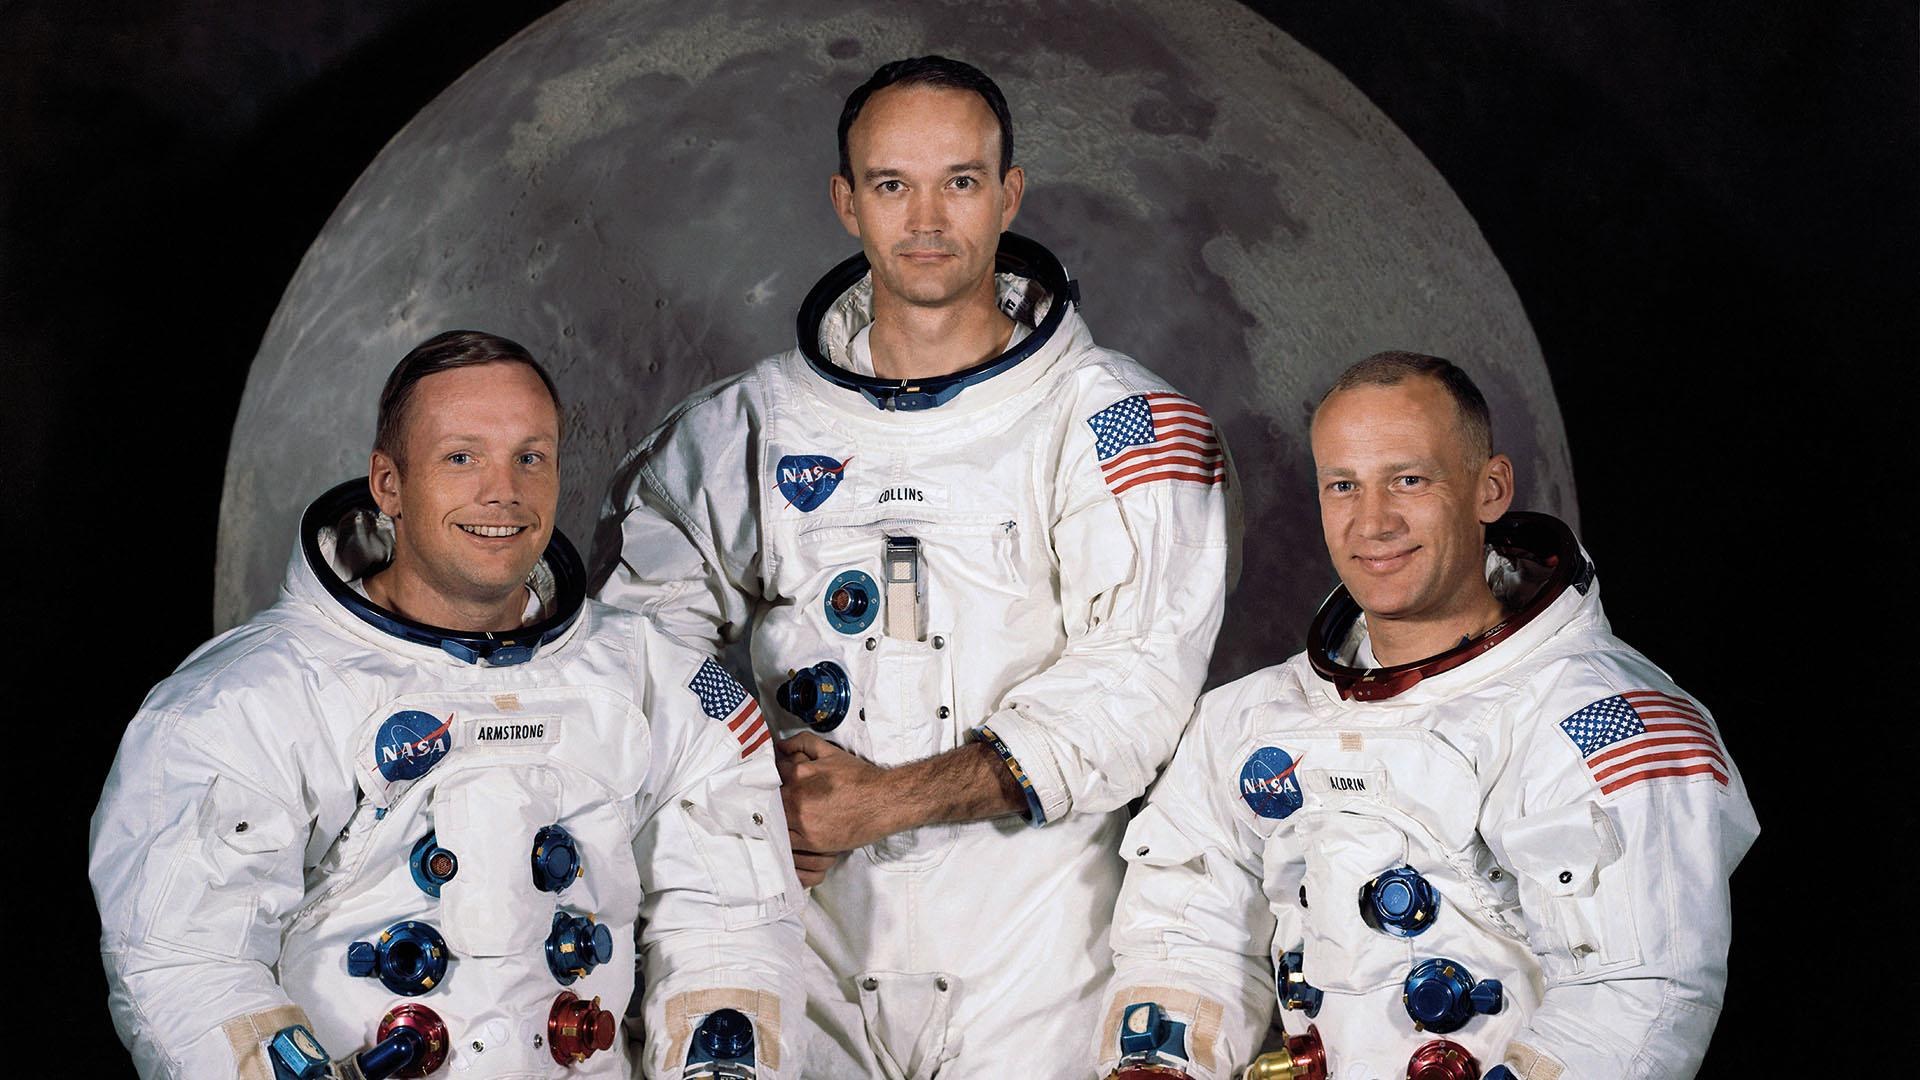 The three astronauts, Neil Armstrong (left), Michael Collins (centre) and Edwin ‘Buzz’ Aldrin.